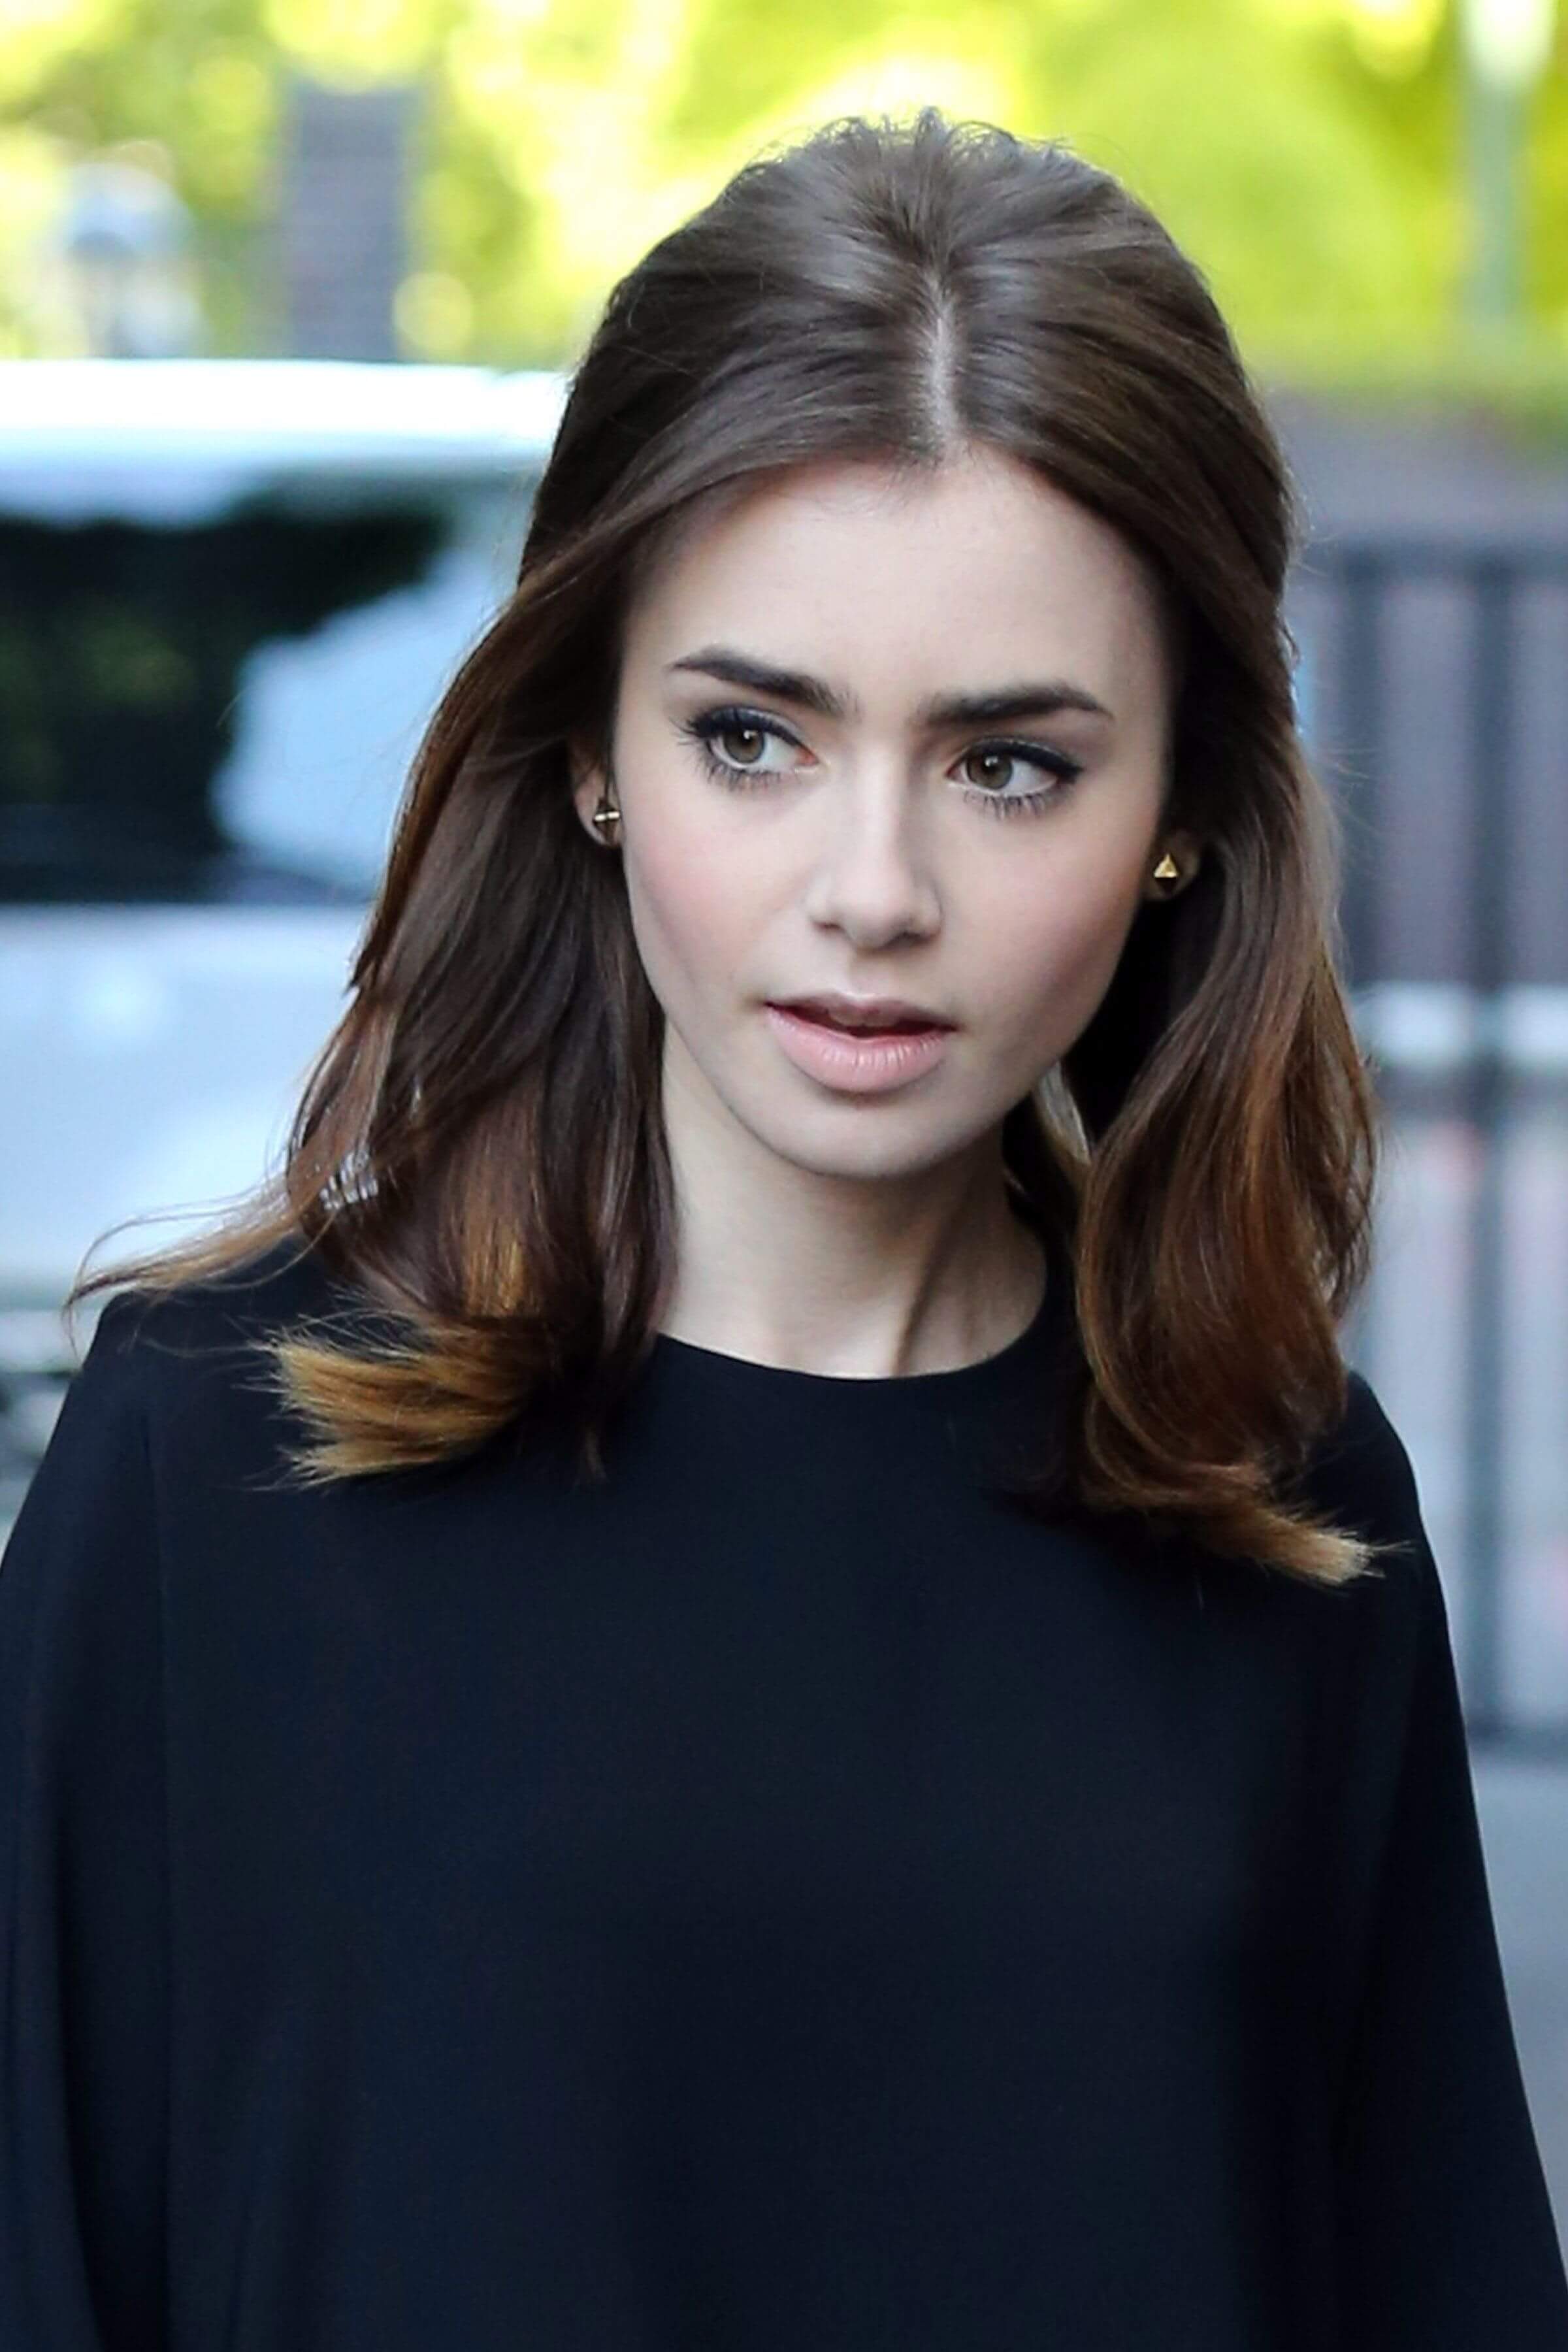 lily collins hairstyle